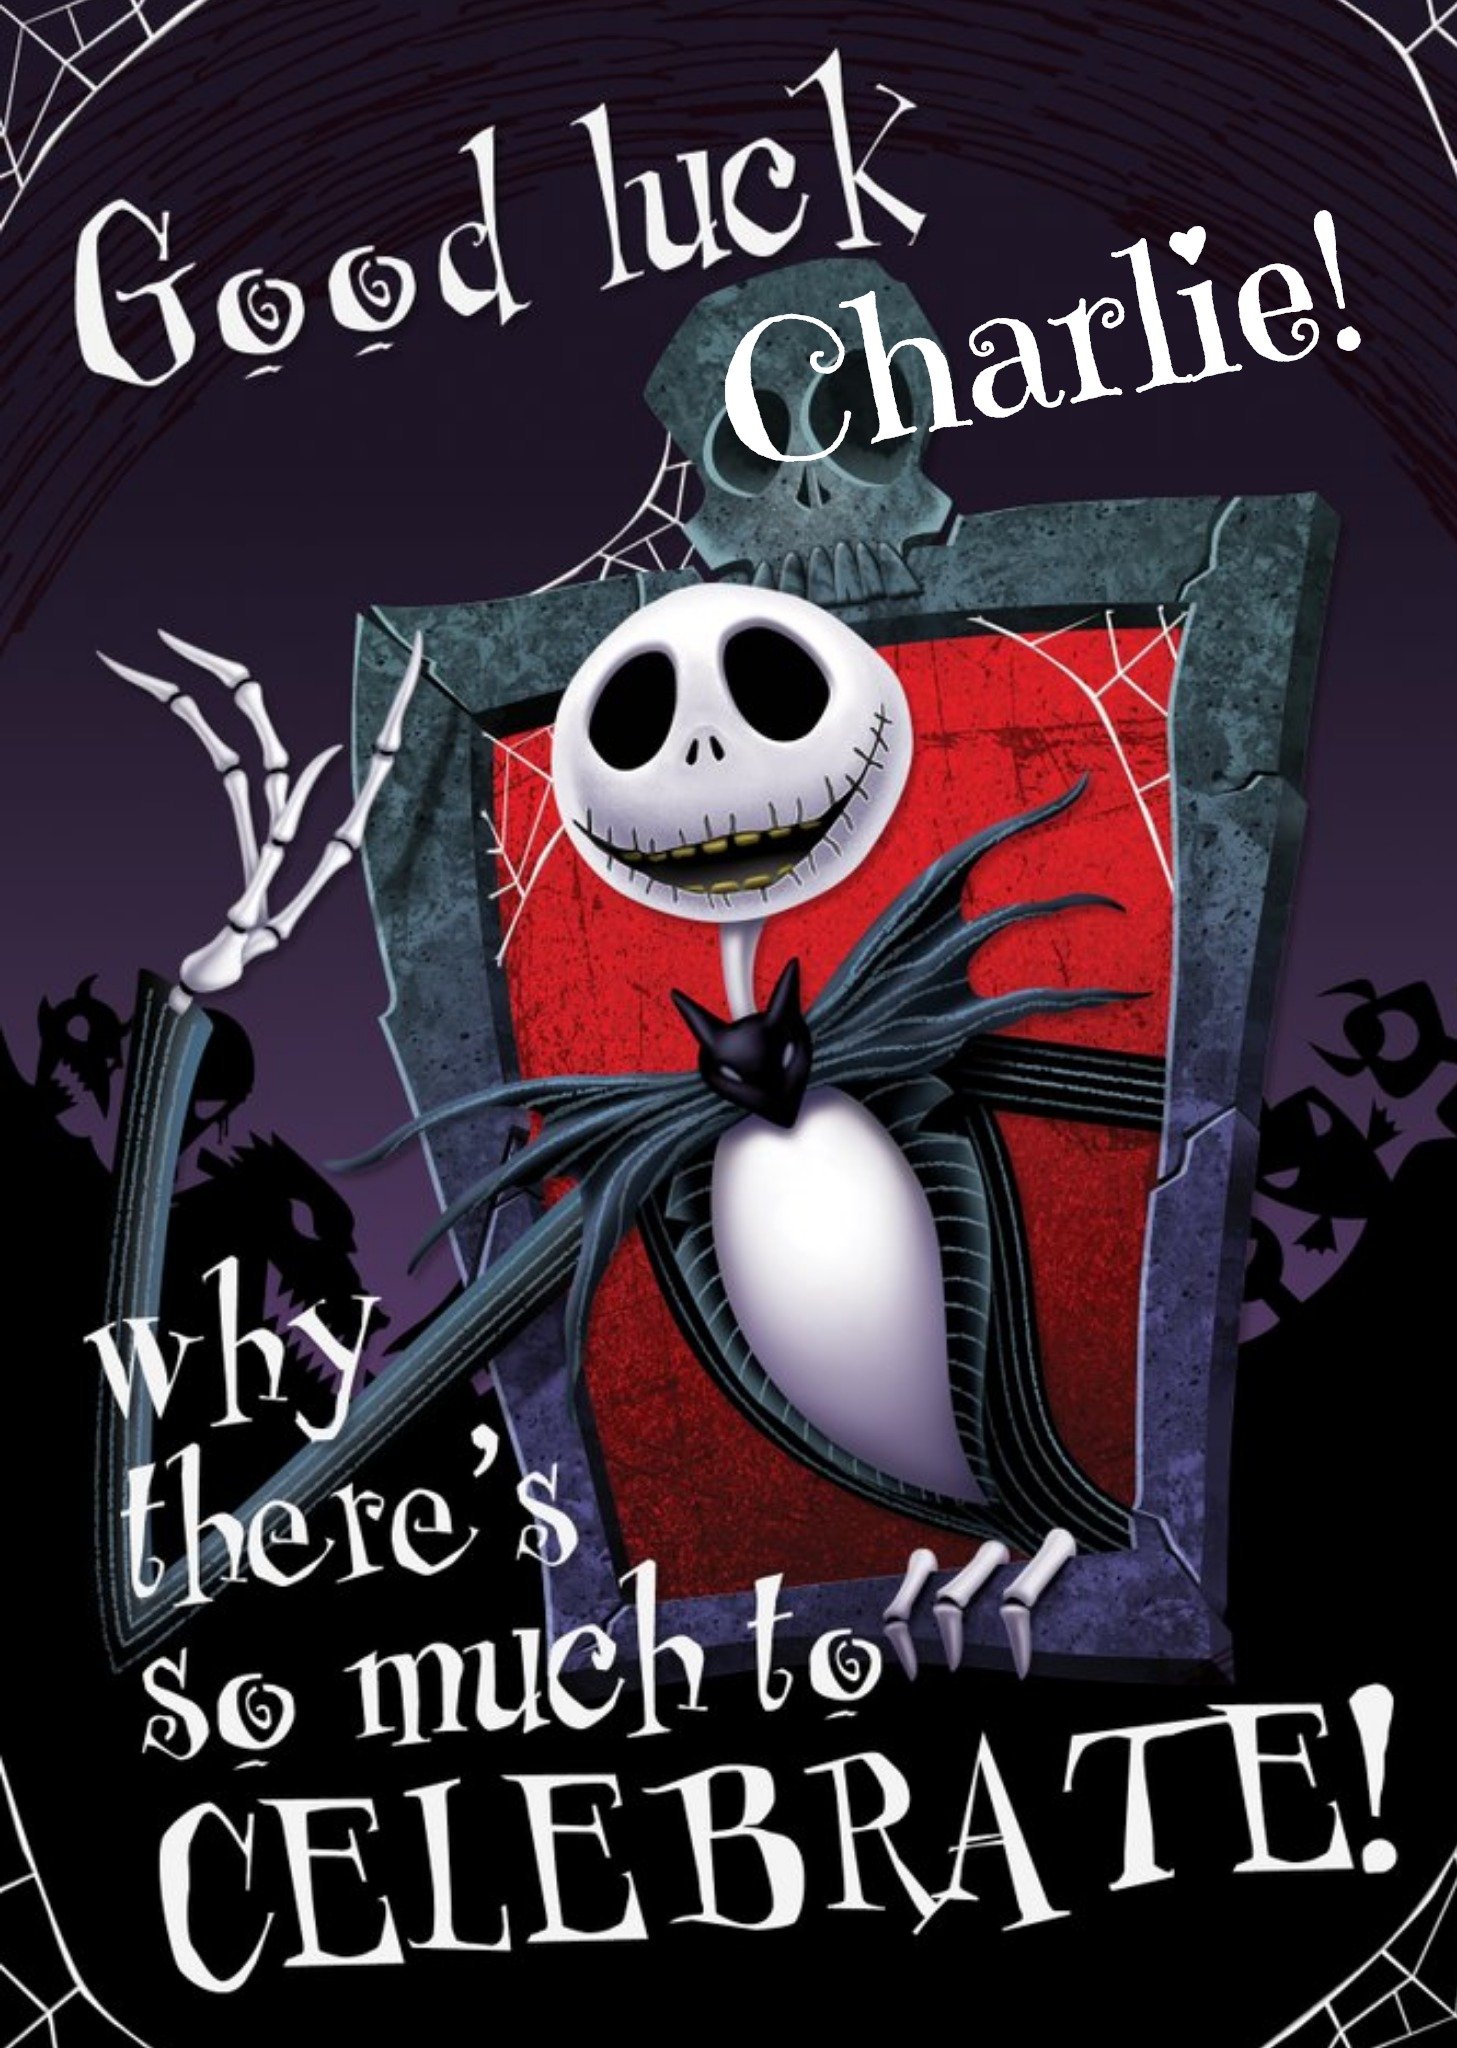 Disney The Nightmare Before Christmas Personalised Good Luck Card, Large